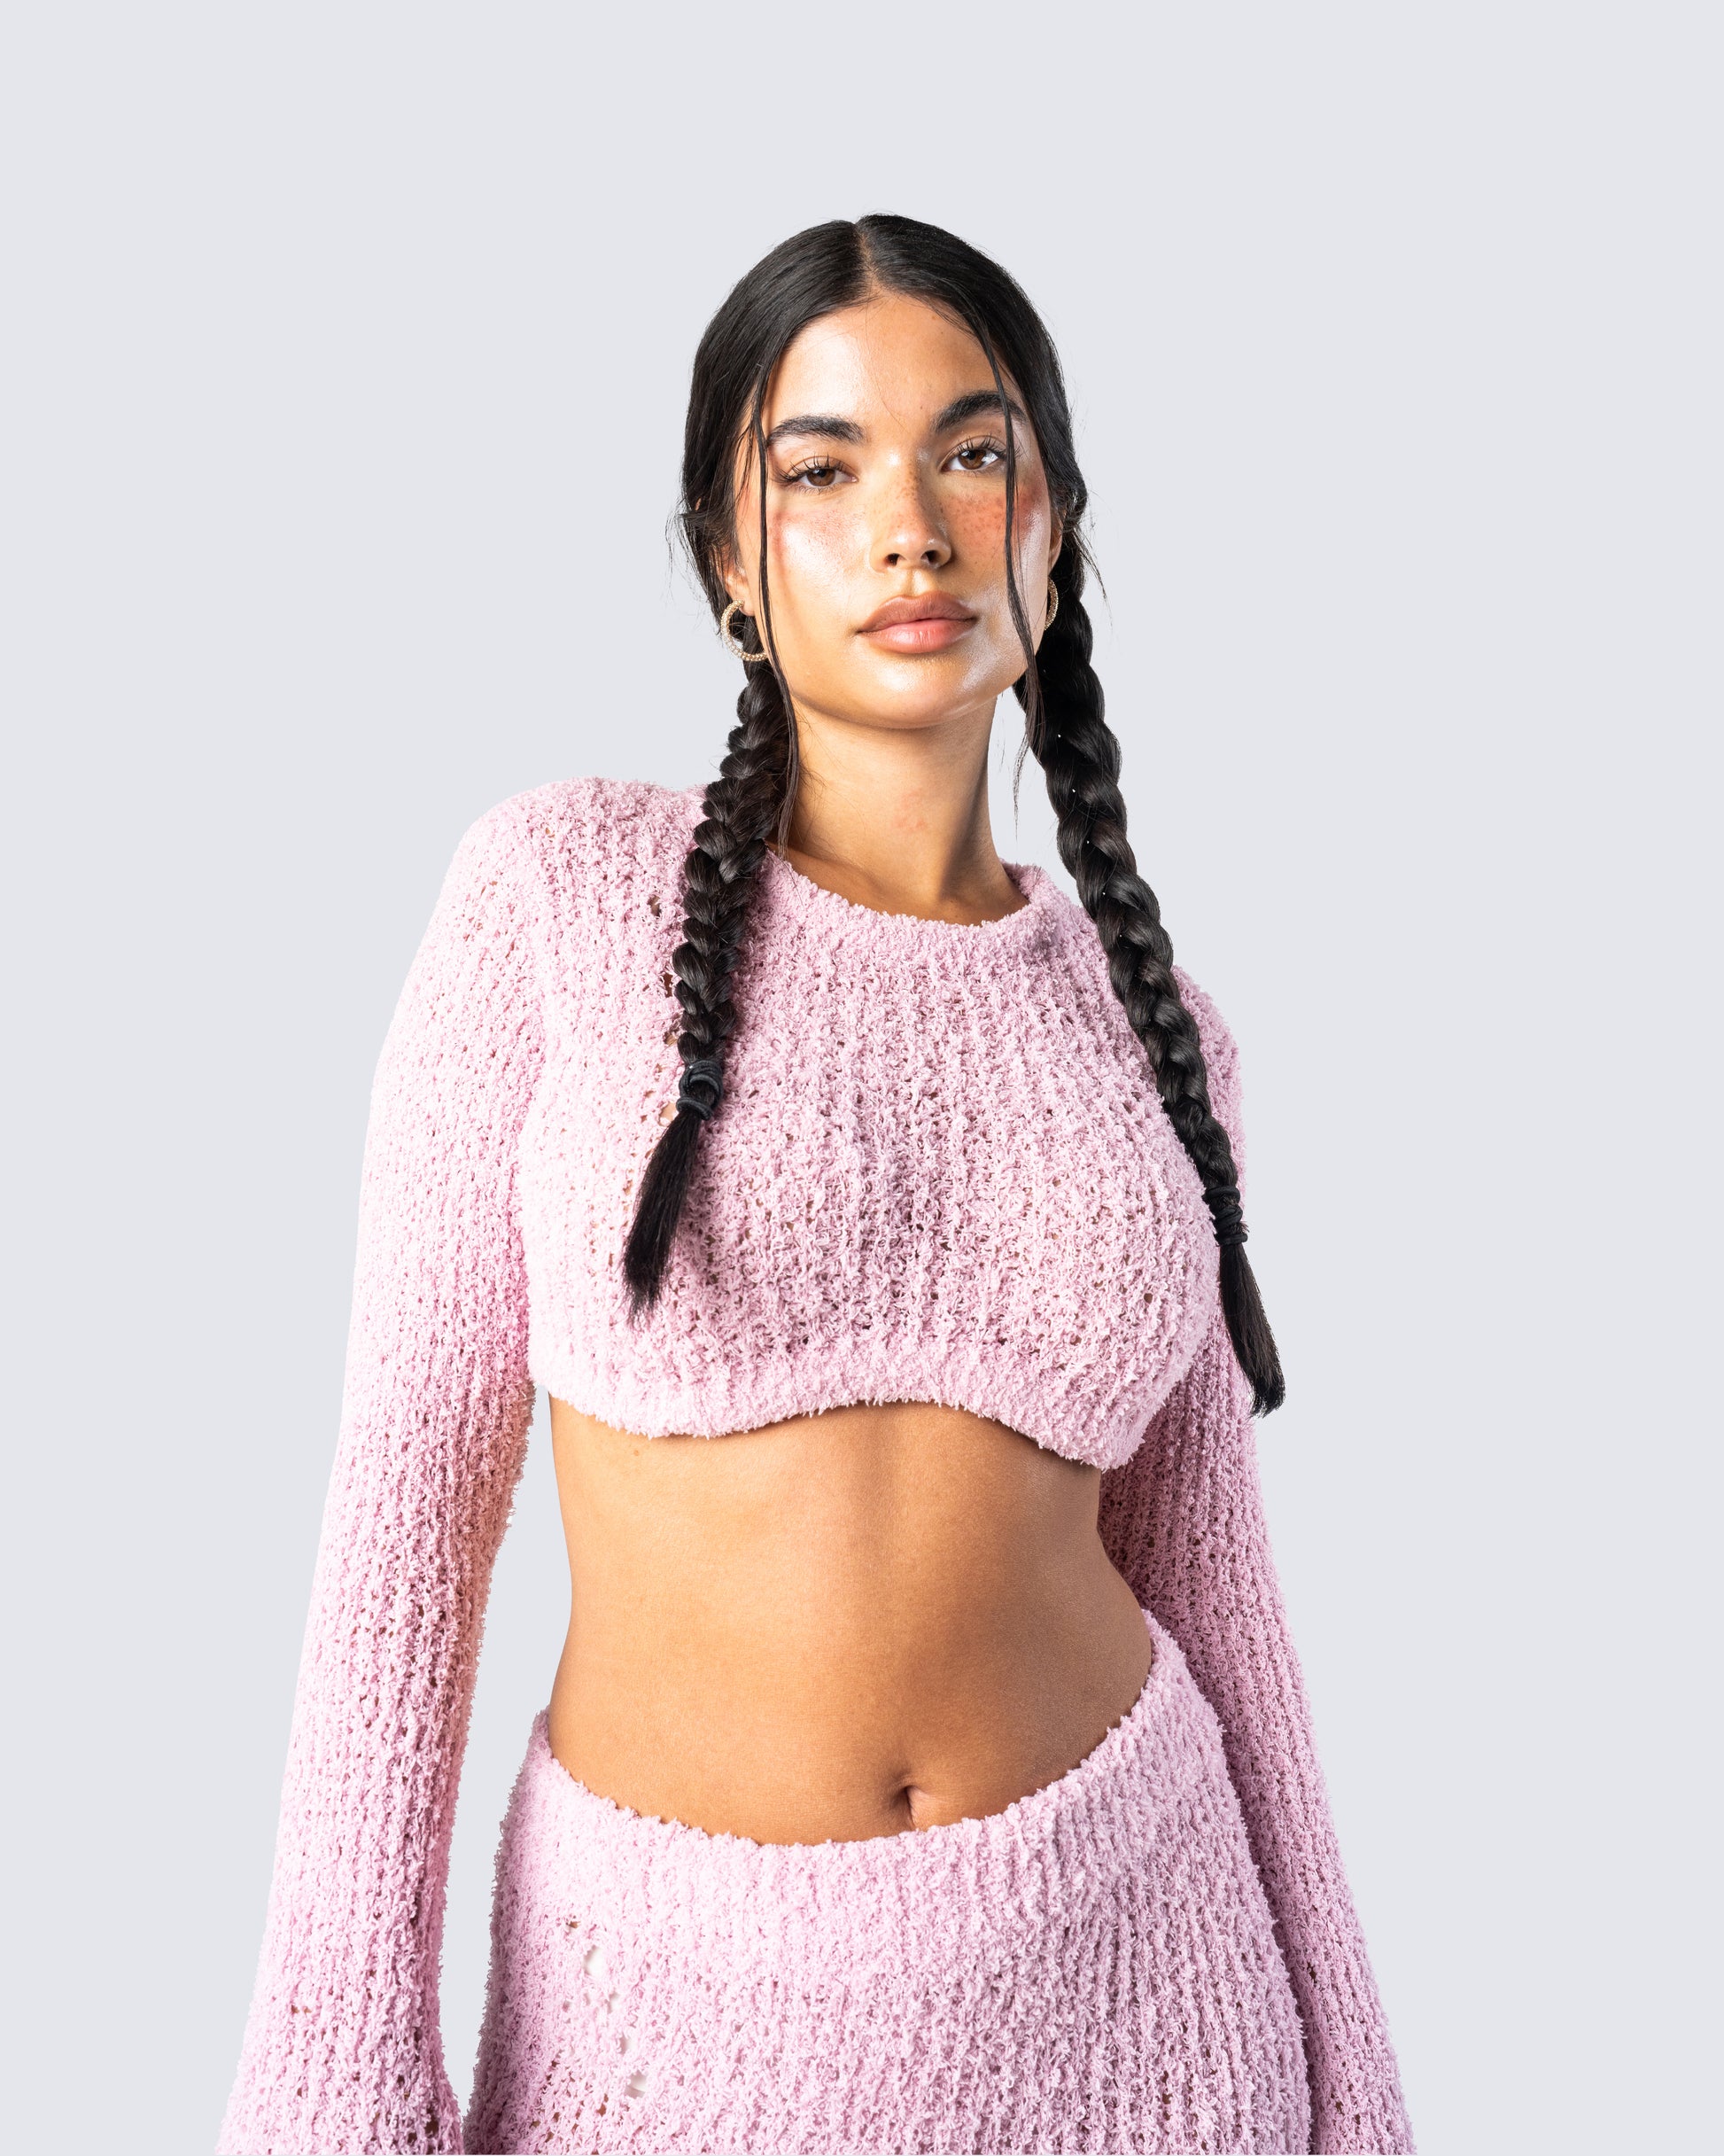 Light Pink Cropped Knit Top  Knit crop top, Light pink tops, Pink